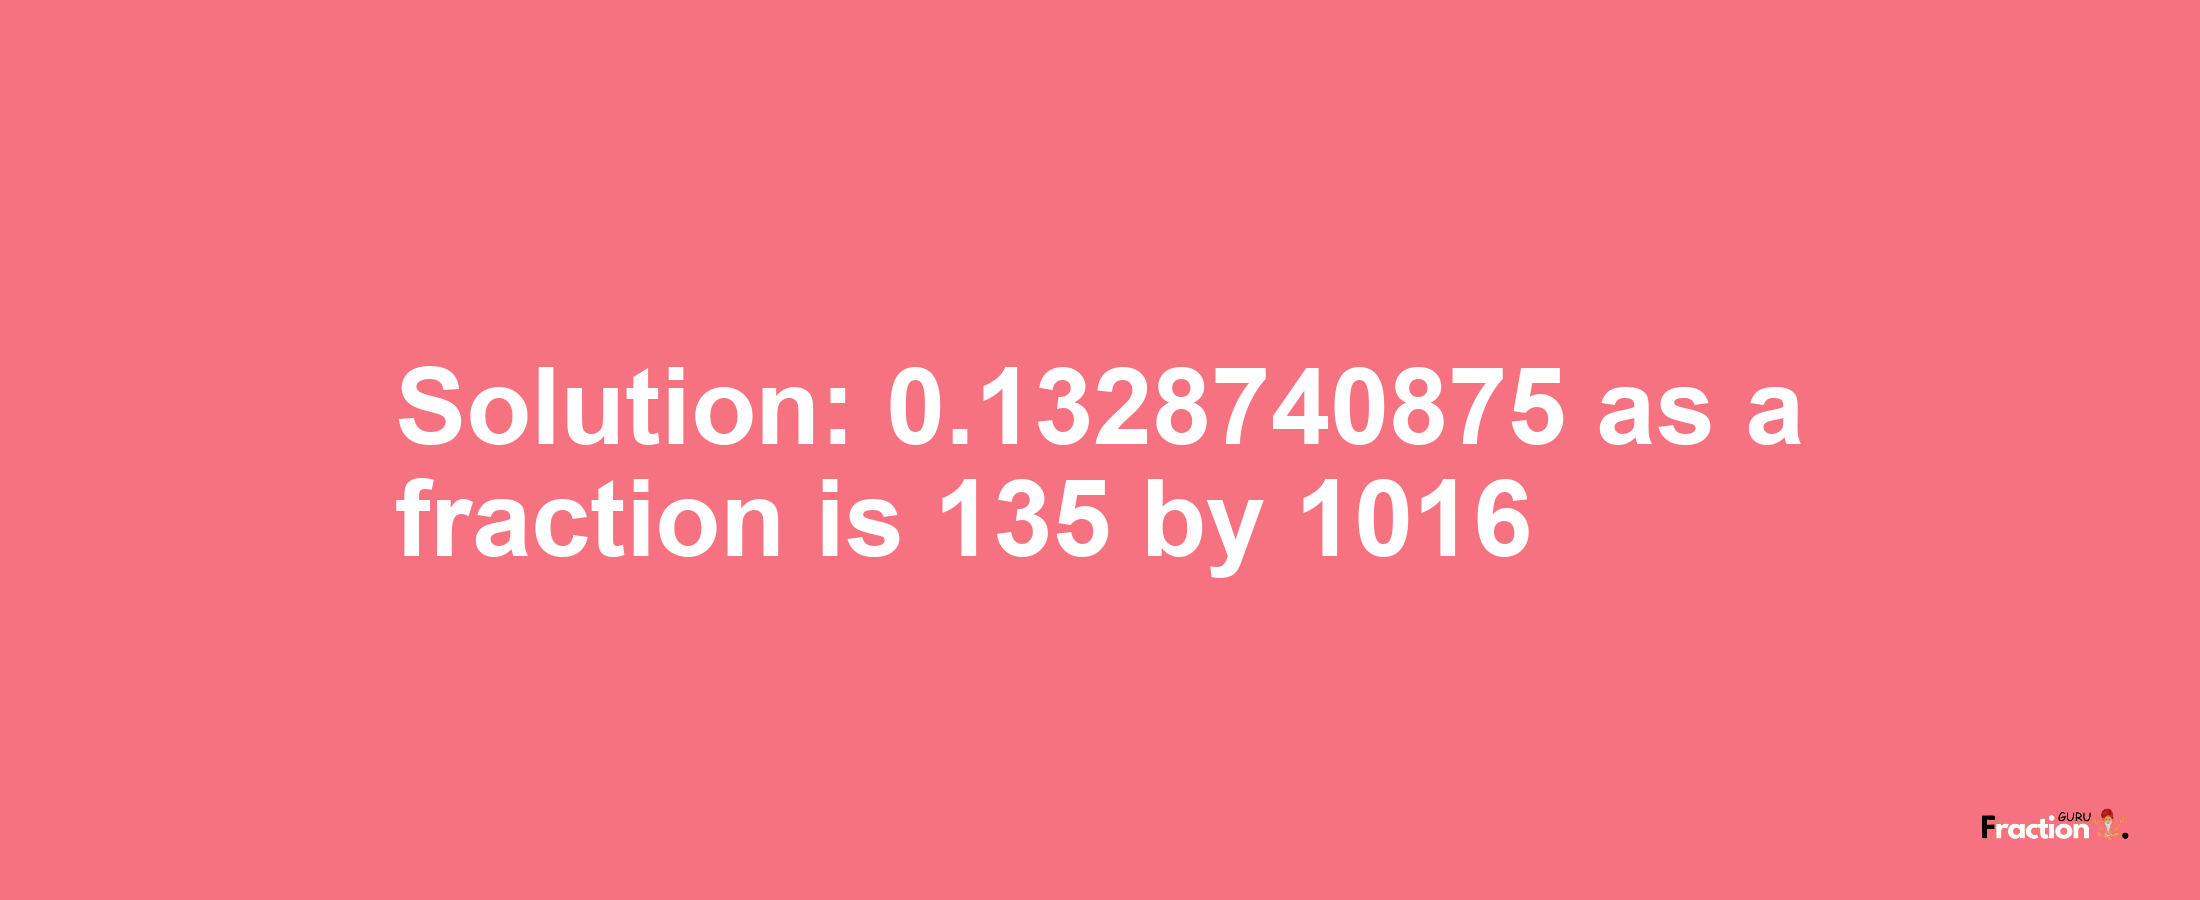 Solution:0.1328740875 as a fraction is 135/1016